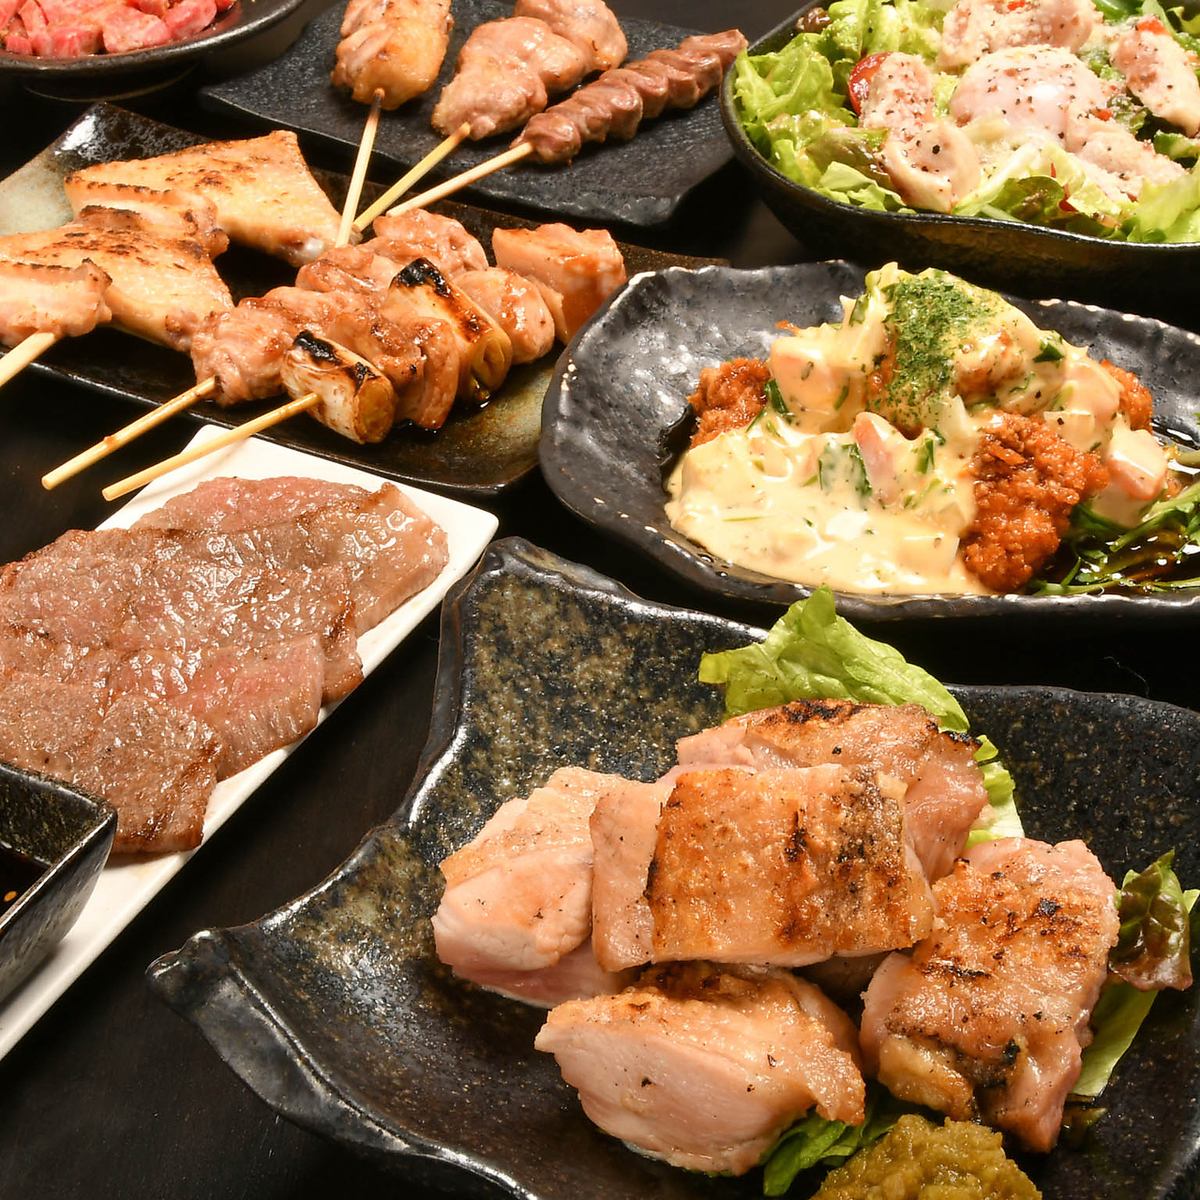 Izakaya where you can enjoy the specialty of grilled chicken luxuriously